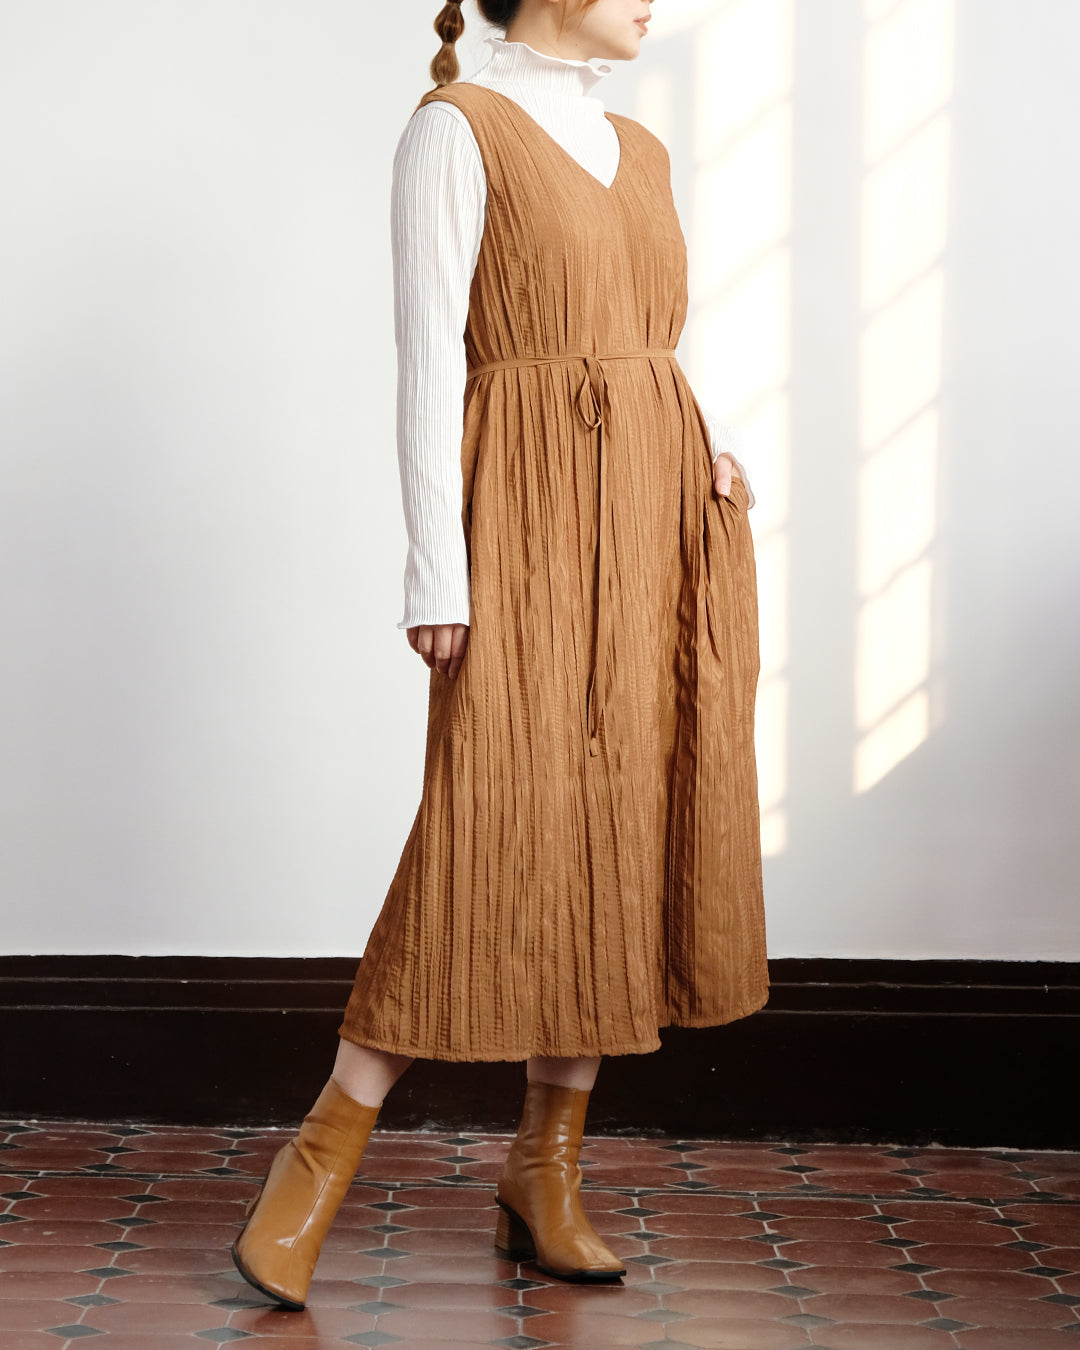 Relaxed Dress in Crinkle Fabric (Caramel)